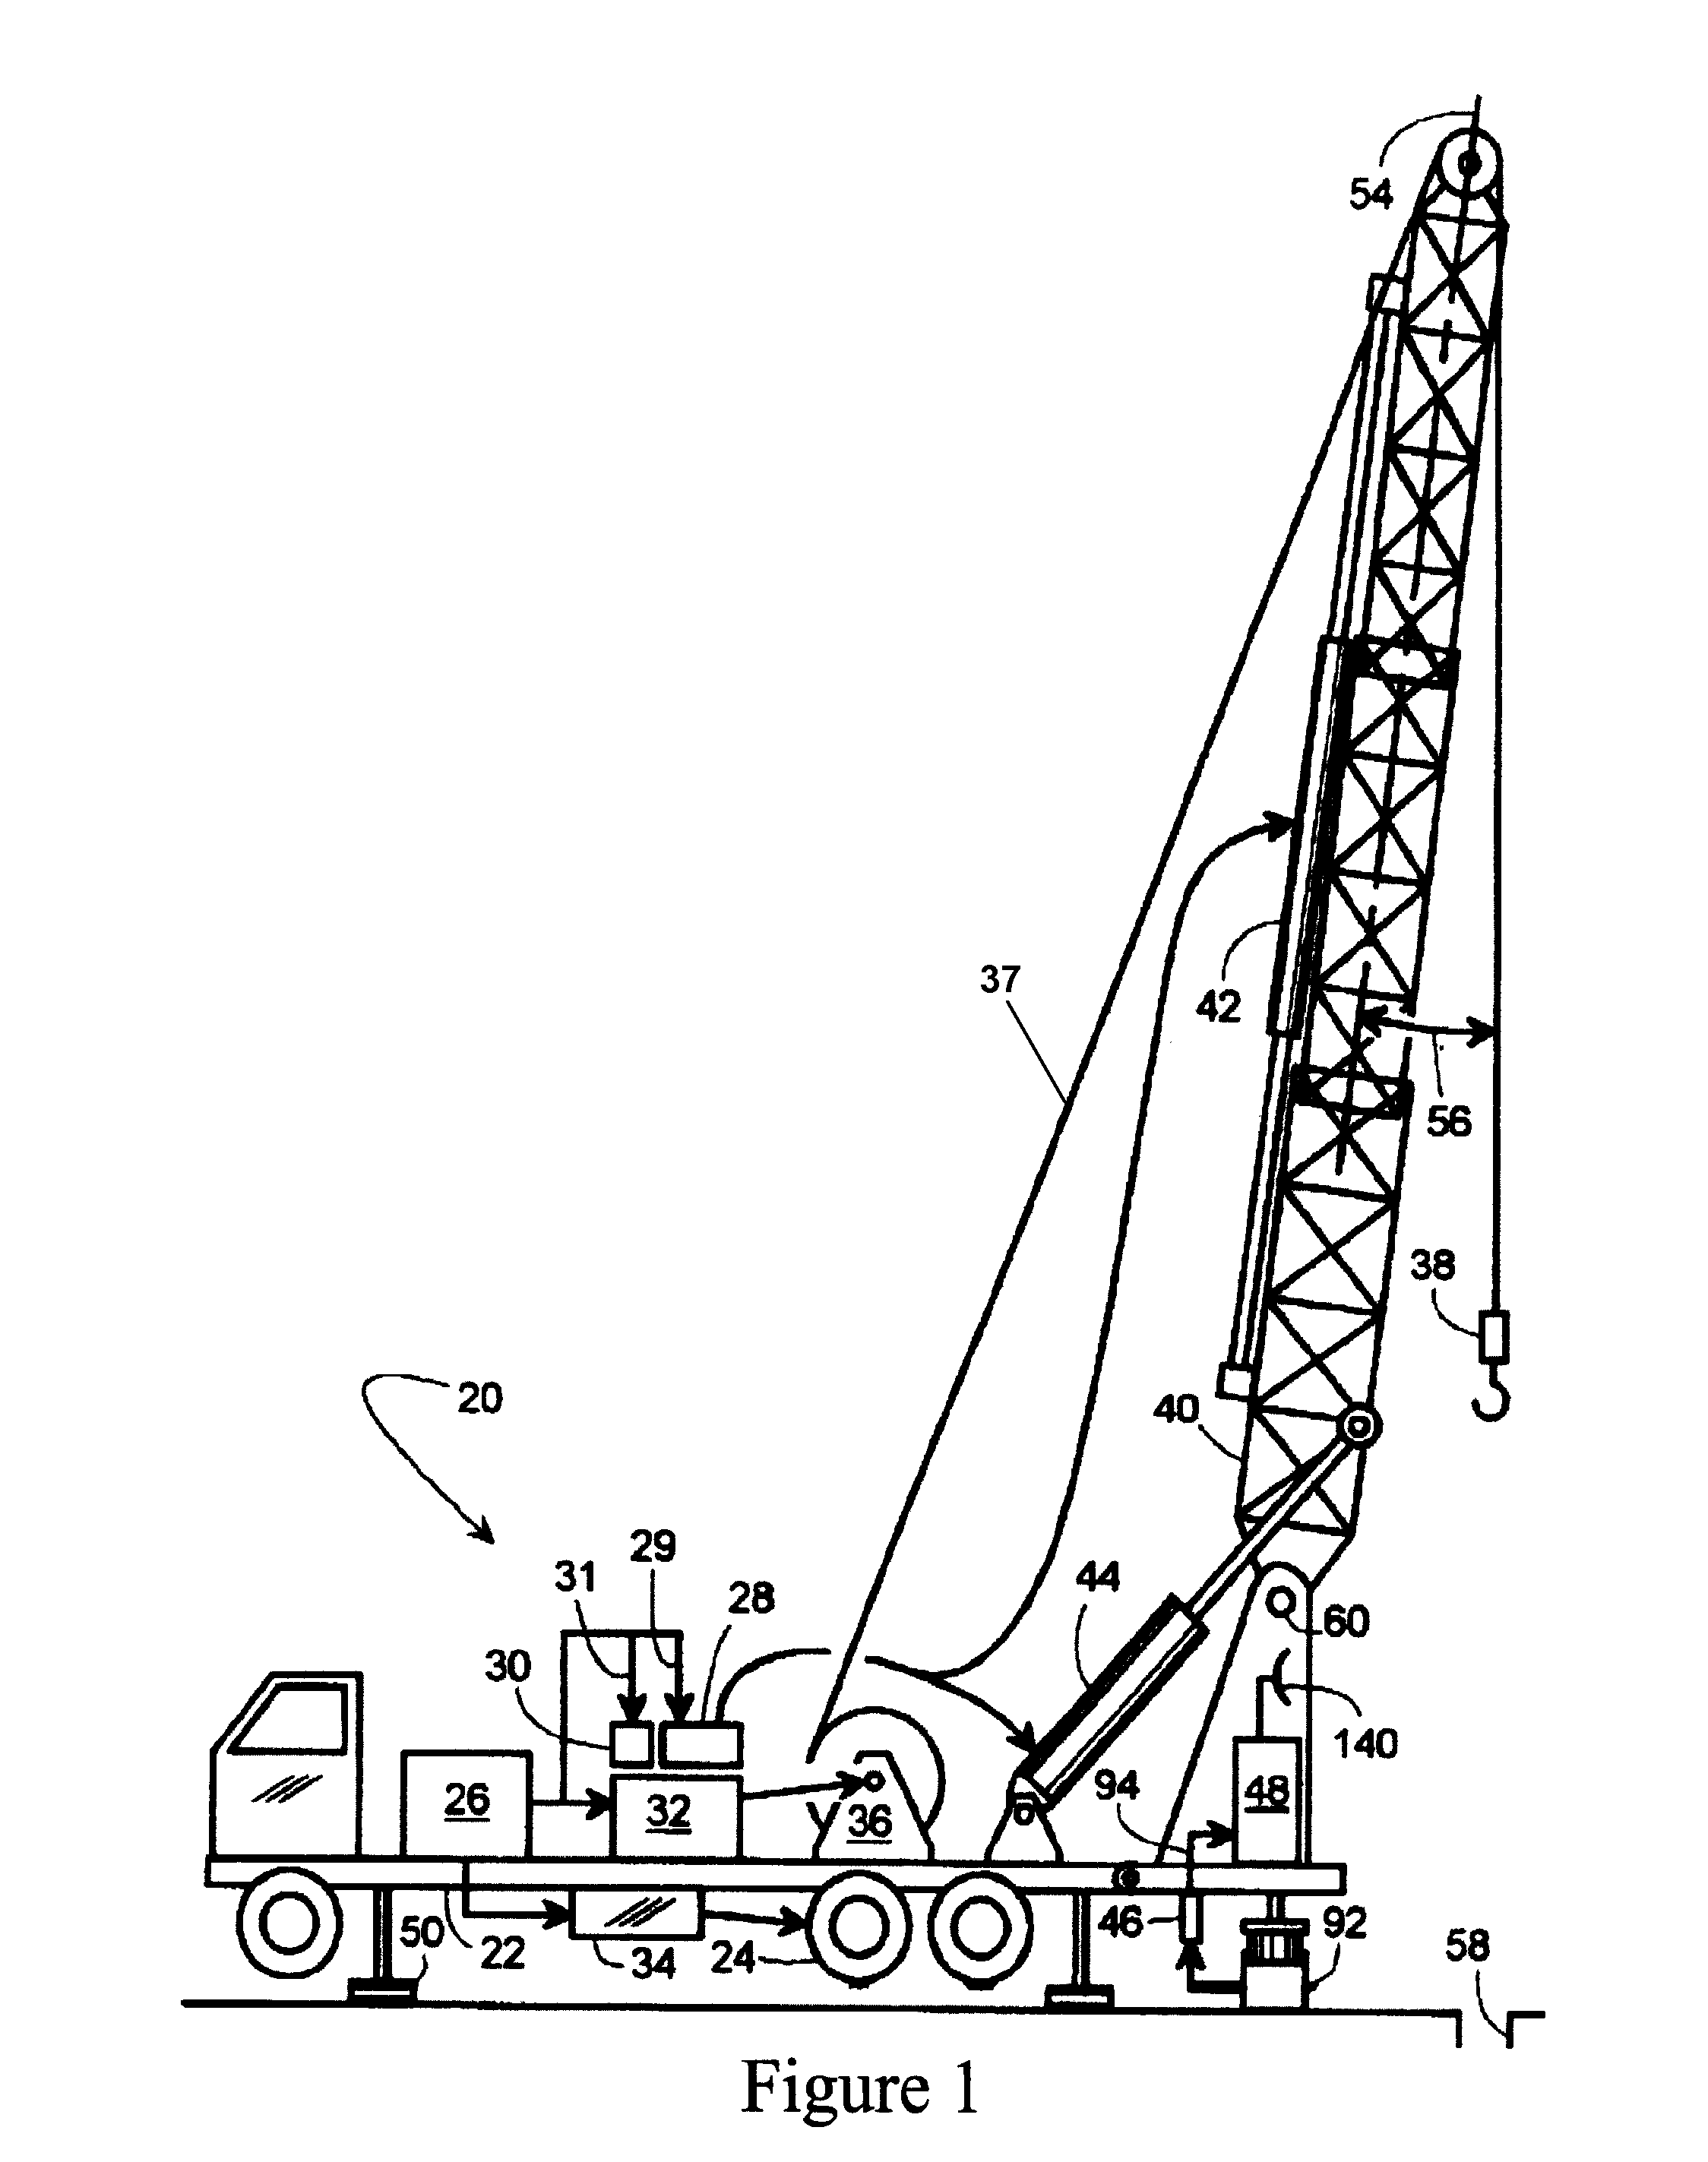 Method and system for automatically setting, adjusting, and monitoring load-based limits on a well service rig